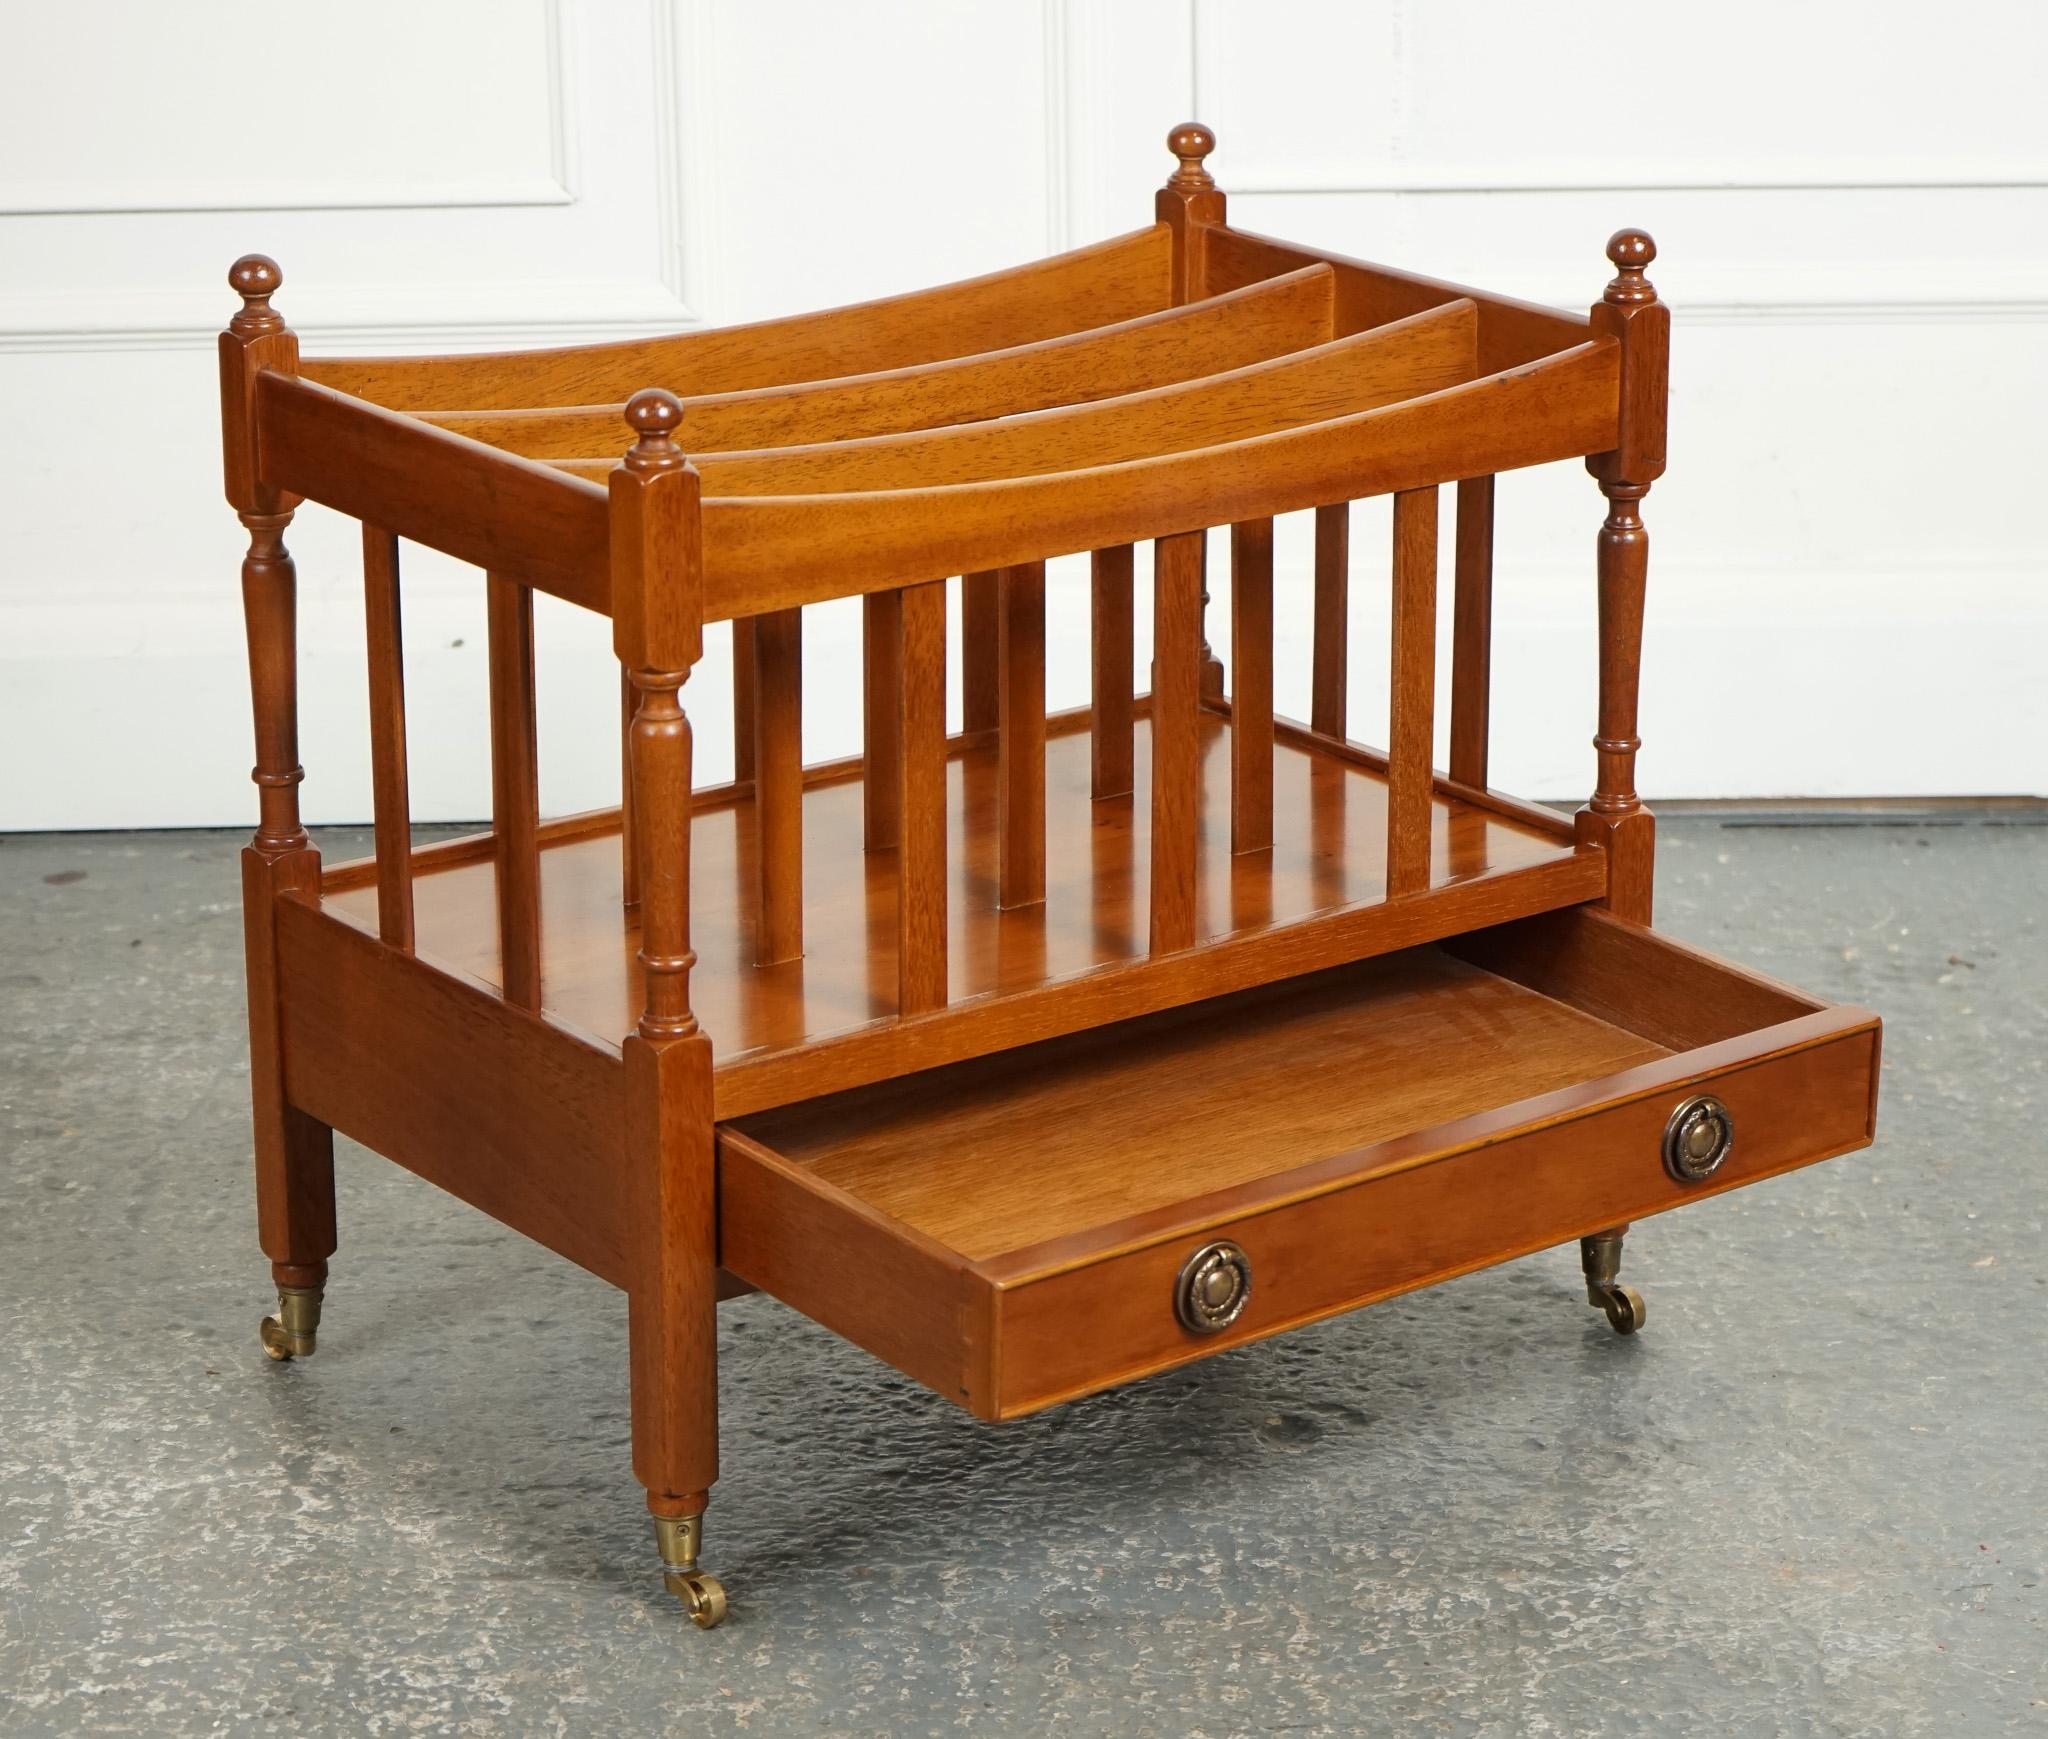 

We are delighted to offer for sale this Lovely Vintage Yew Wood Canterbury Newspaper Rack.

 Typically features a classic design with a slatted construction to hold newspapers or magazines. The yew wood used in its construction gives it a rich and